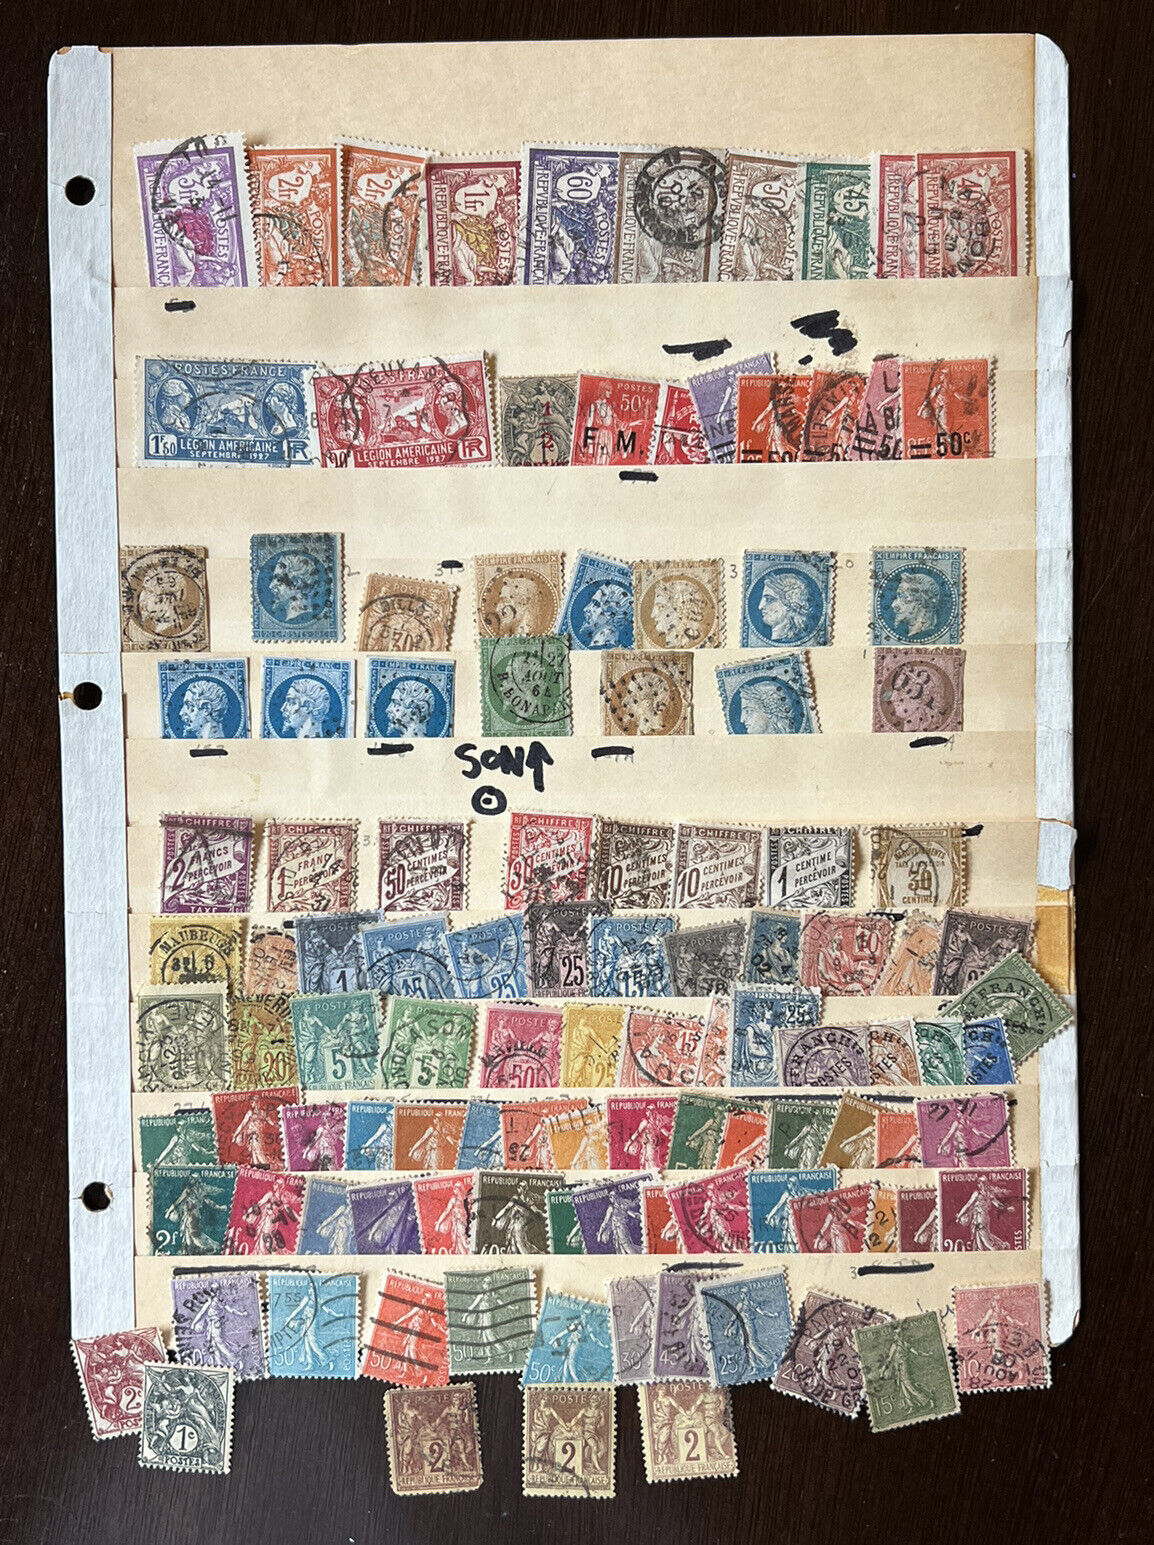 1800\'s - EARLY 1900\'s FRANCE STAMP LOT IN STOCK PAGE VERY NICE COLLECTION